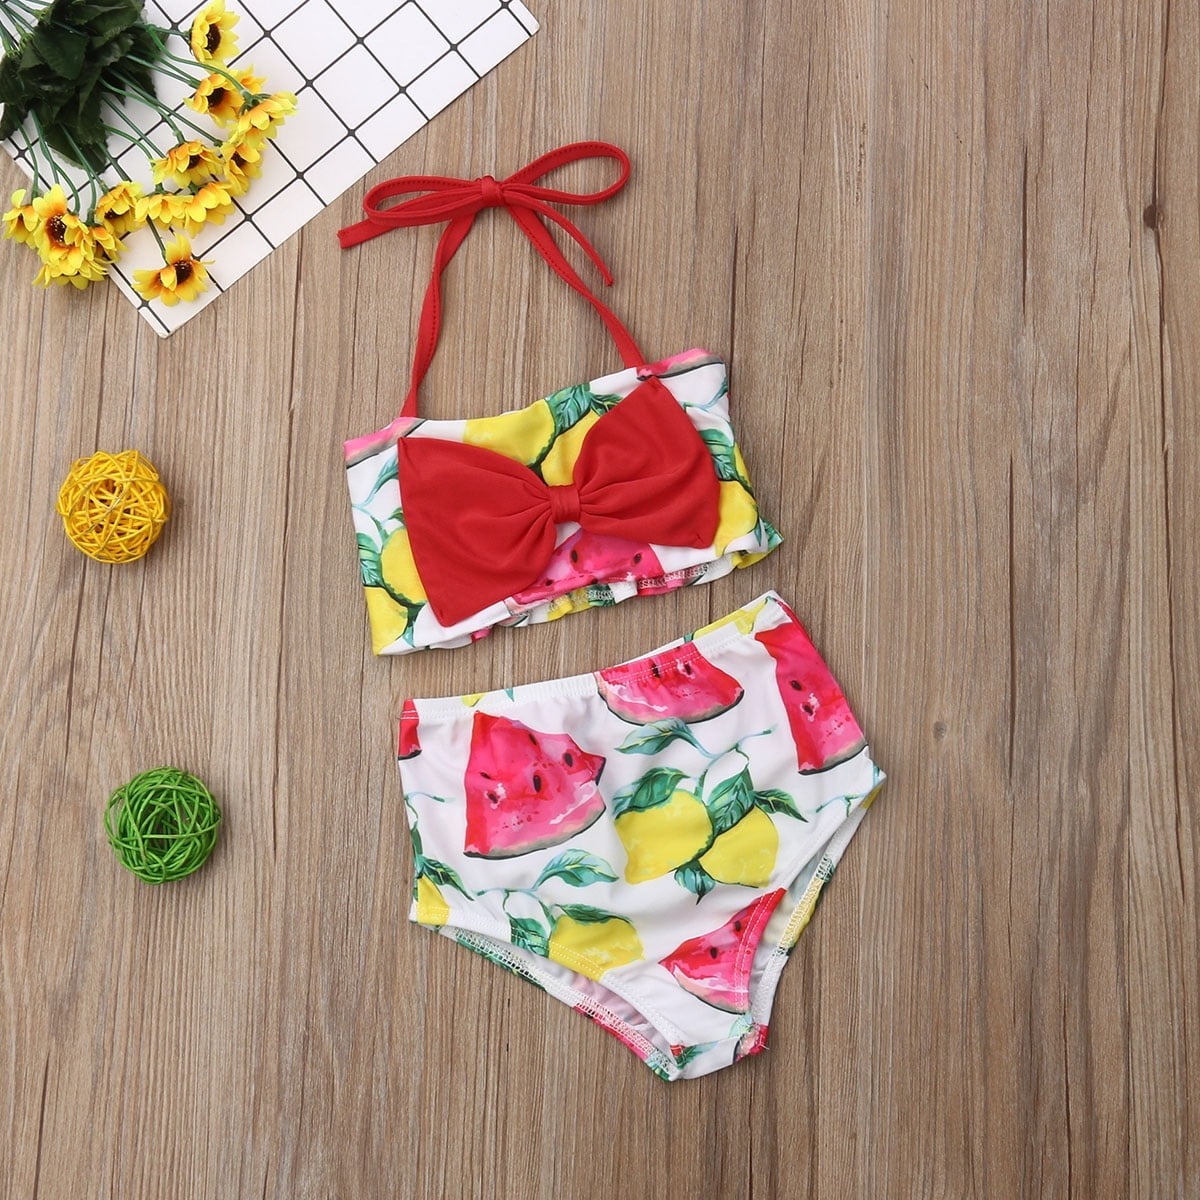 Canis - Toddler Kids Baby Girls Floral Bowknot Swimsuit Summer ...